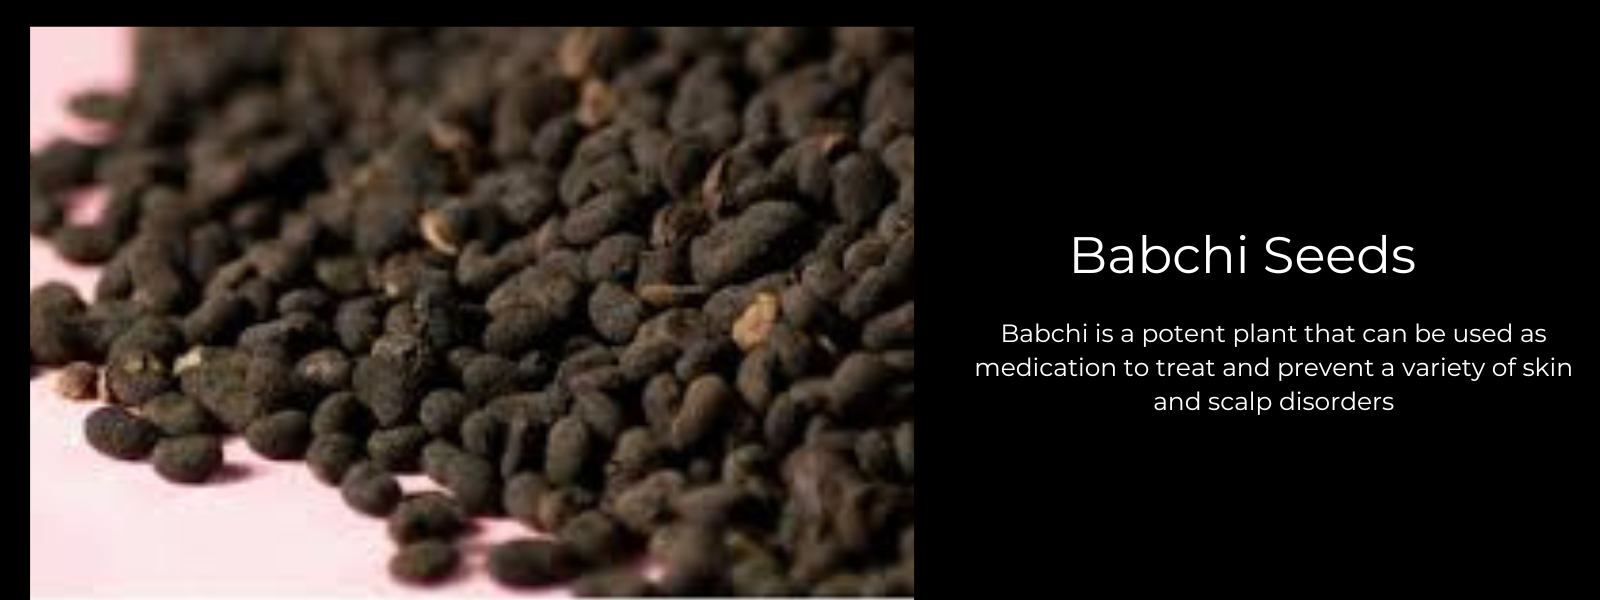 Babchi Seeds- Health Benefits, Uses and Important Facts